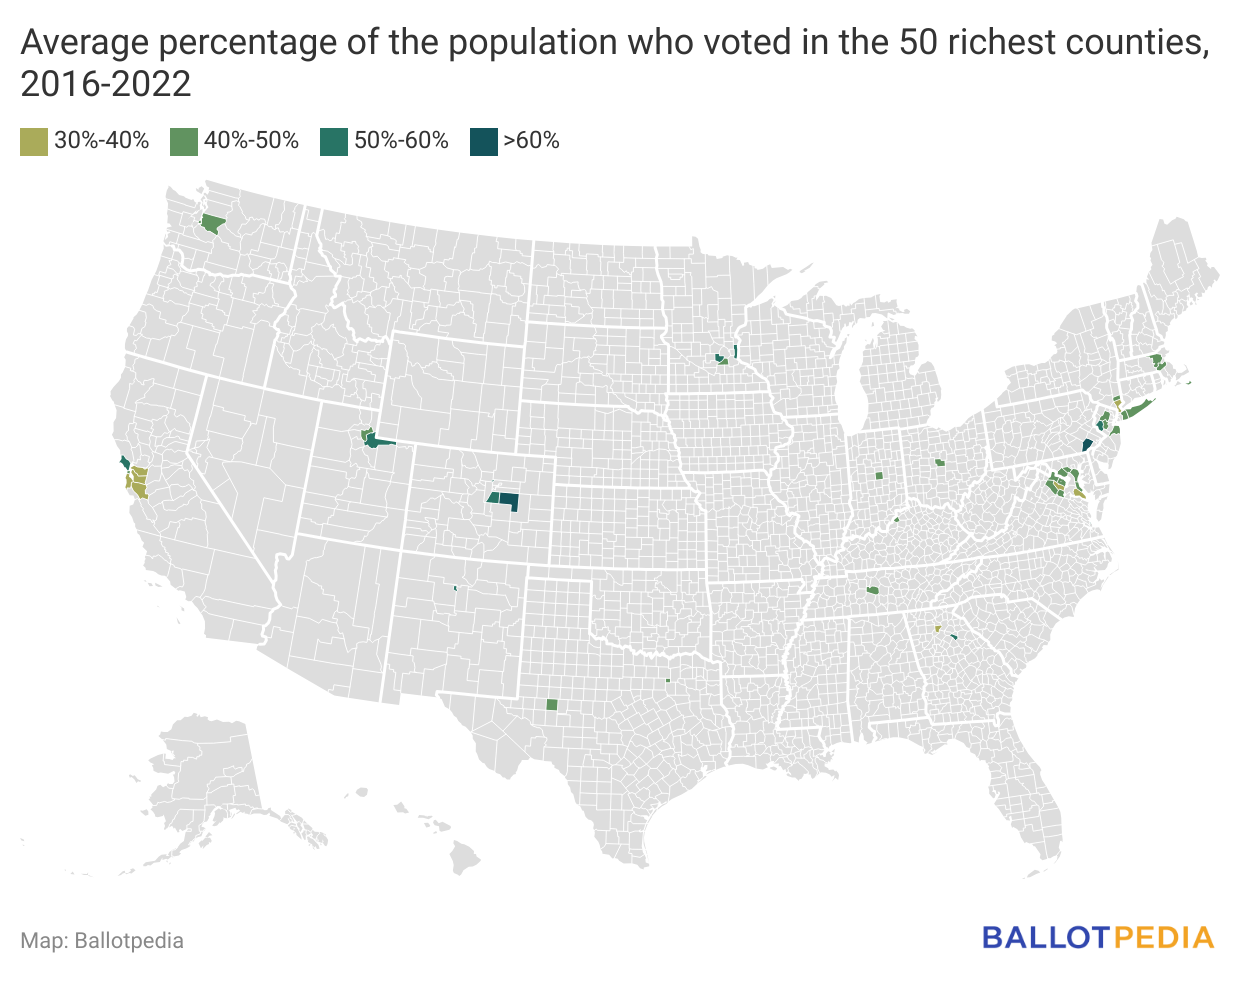 Map showing Average percentage of the population who voted in the 50 richest counties, 2016-2022